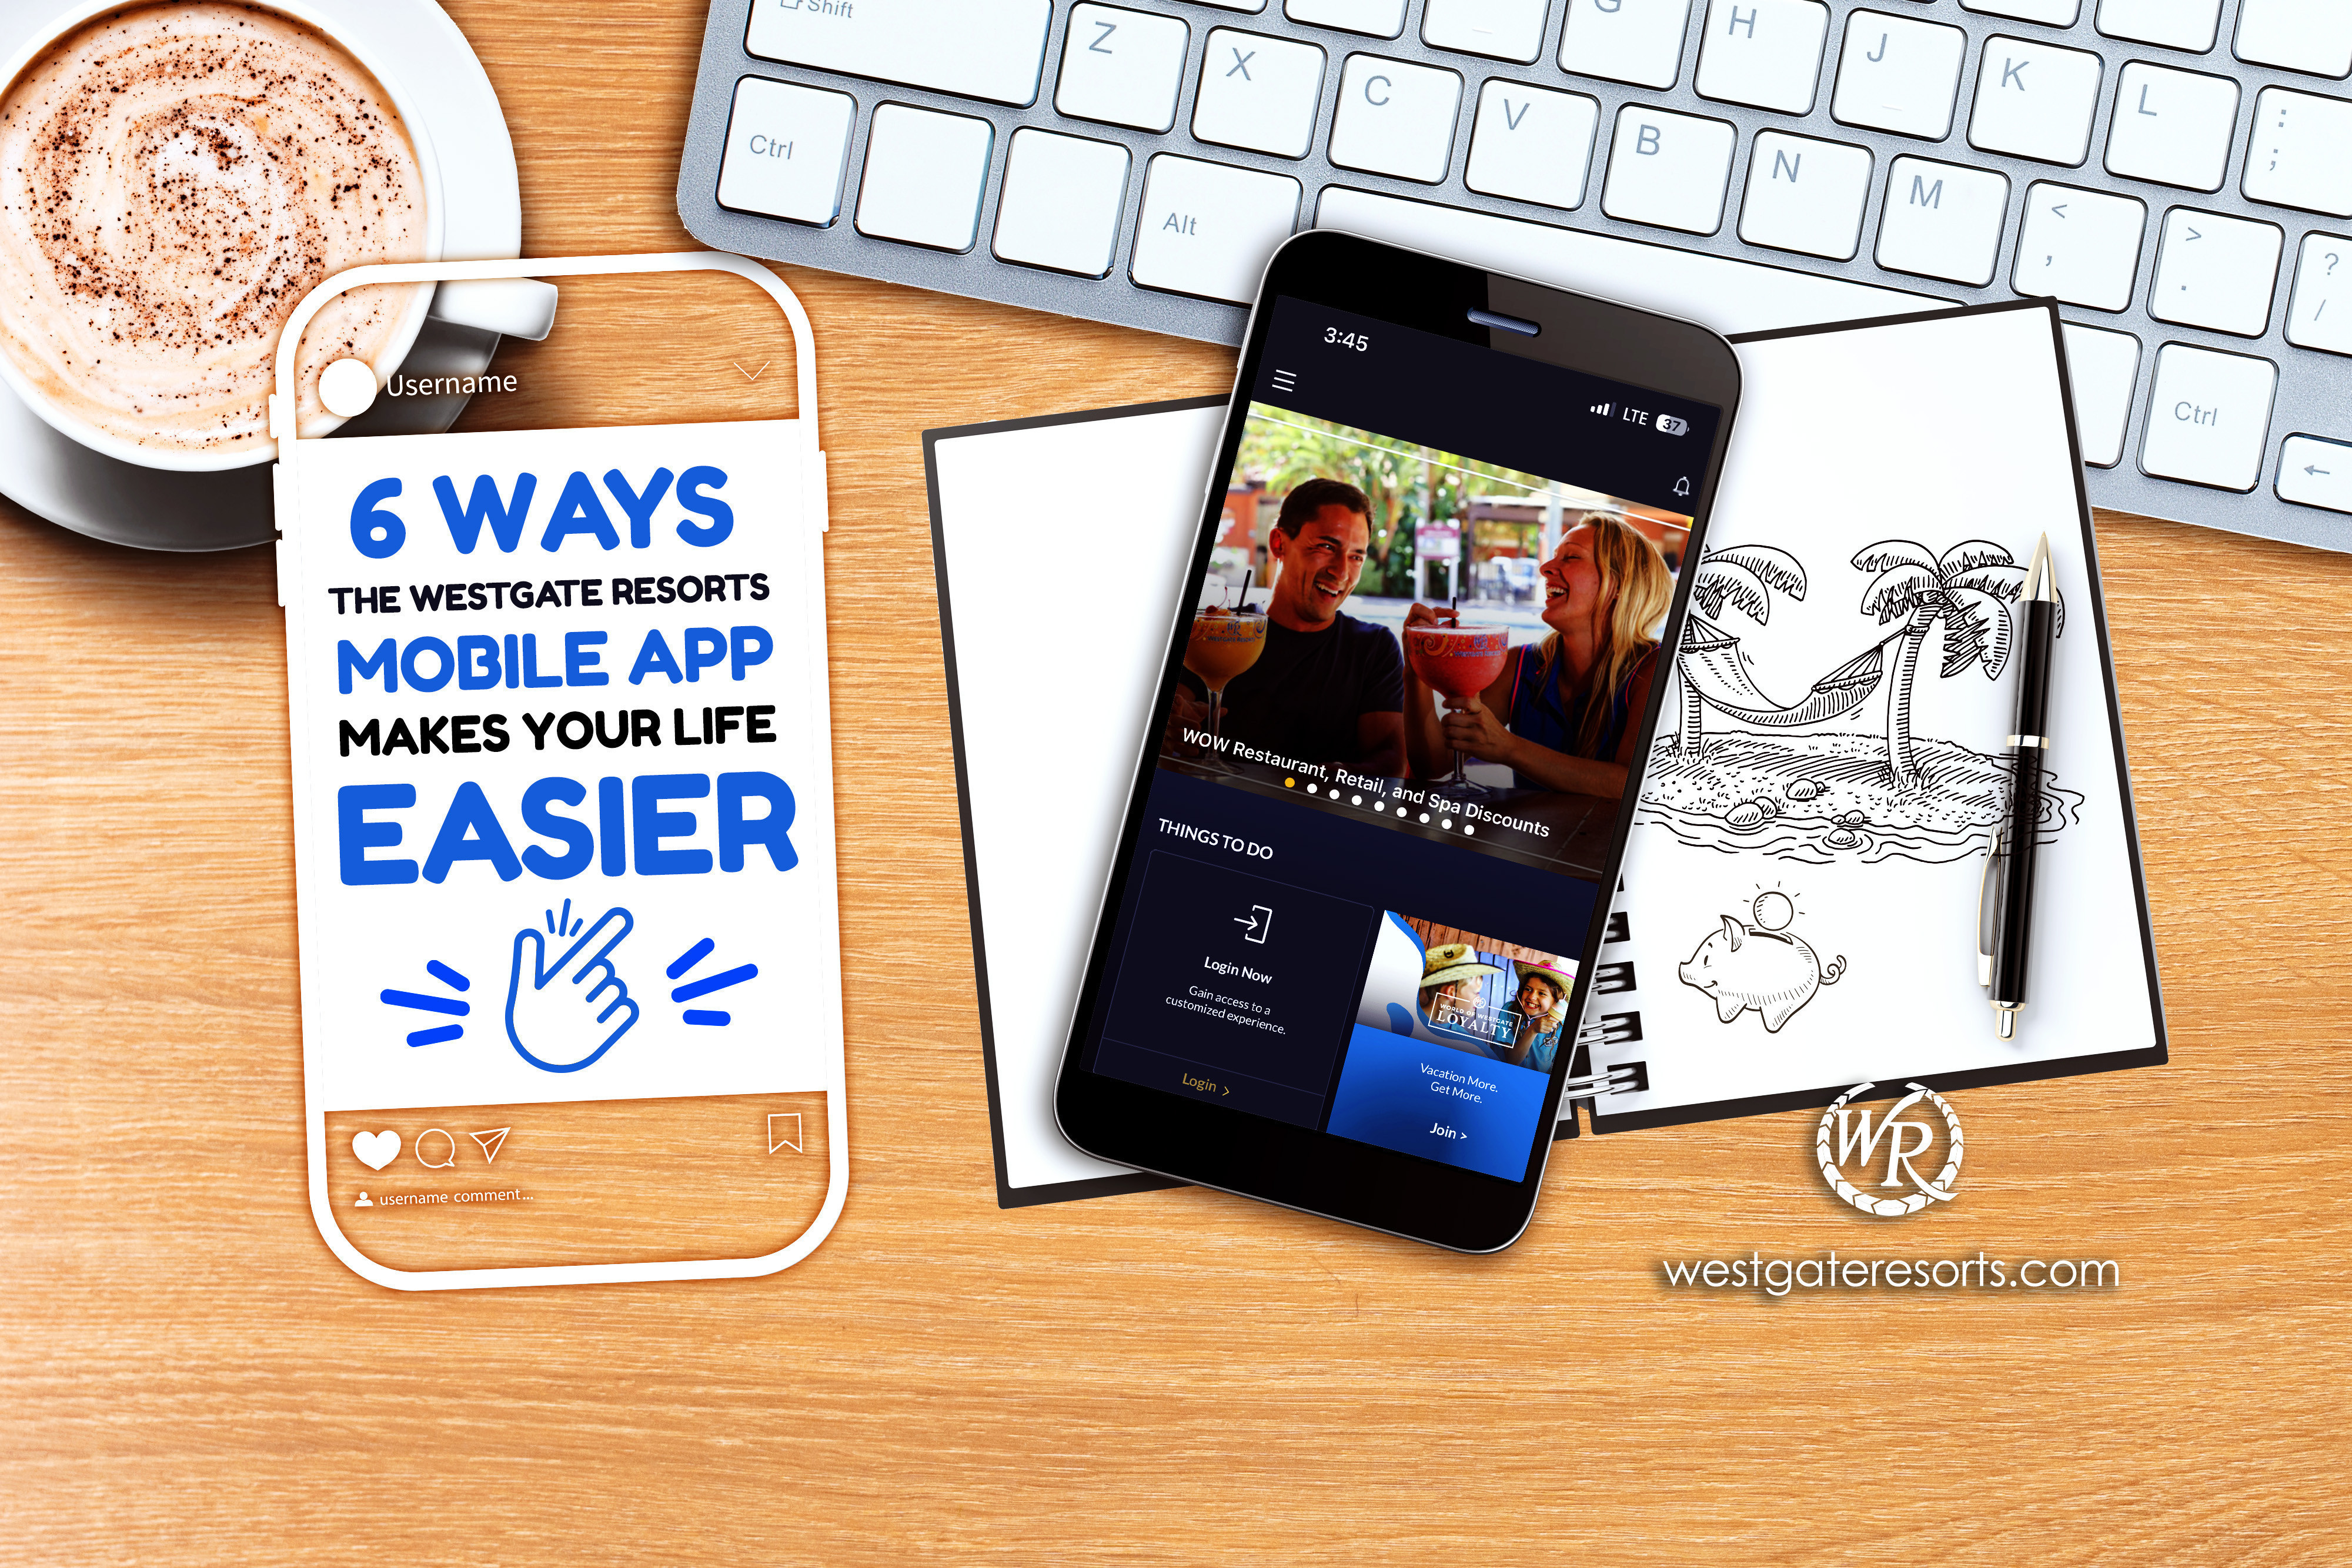 6 Ways the Westgate Resorts Mobile App Makes Your Life Easier